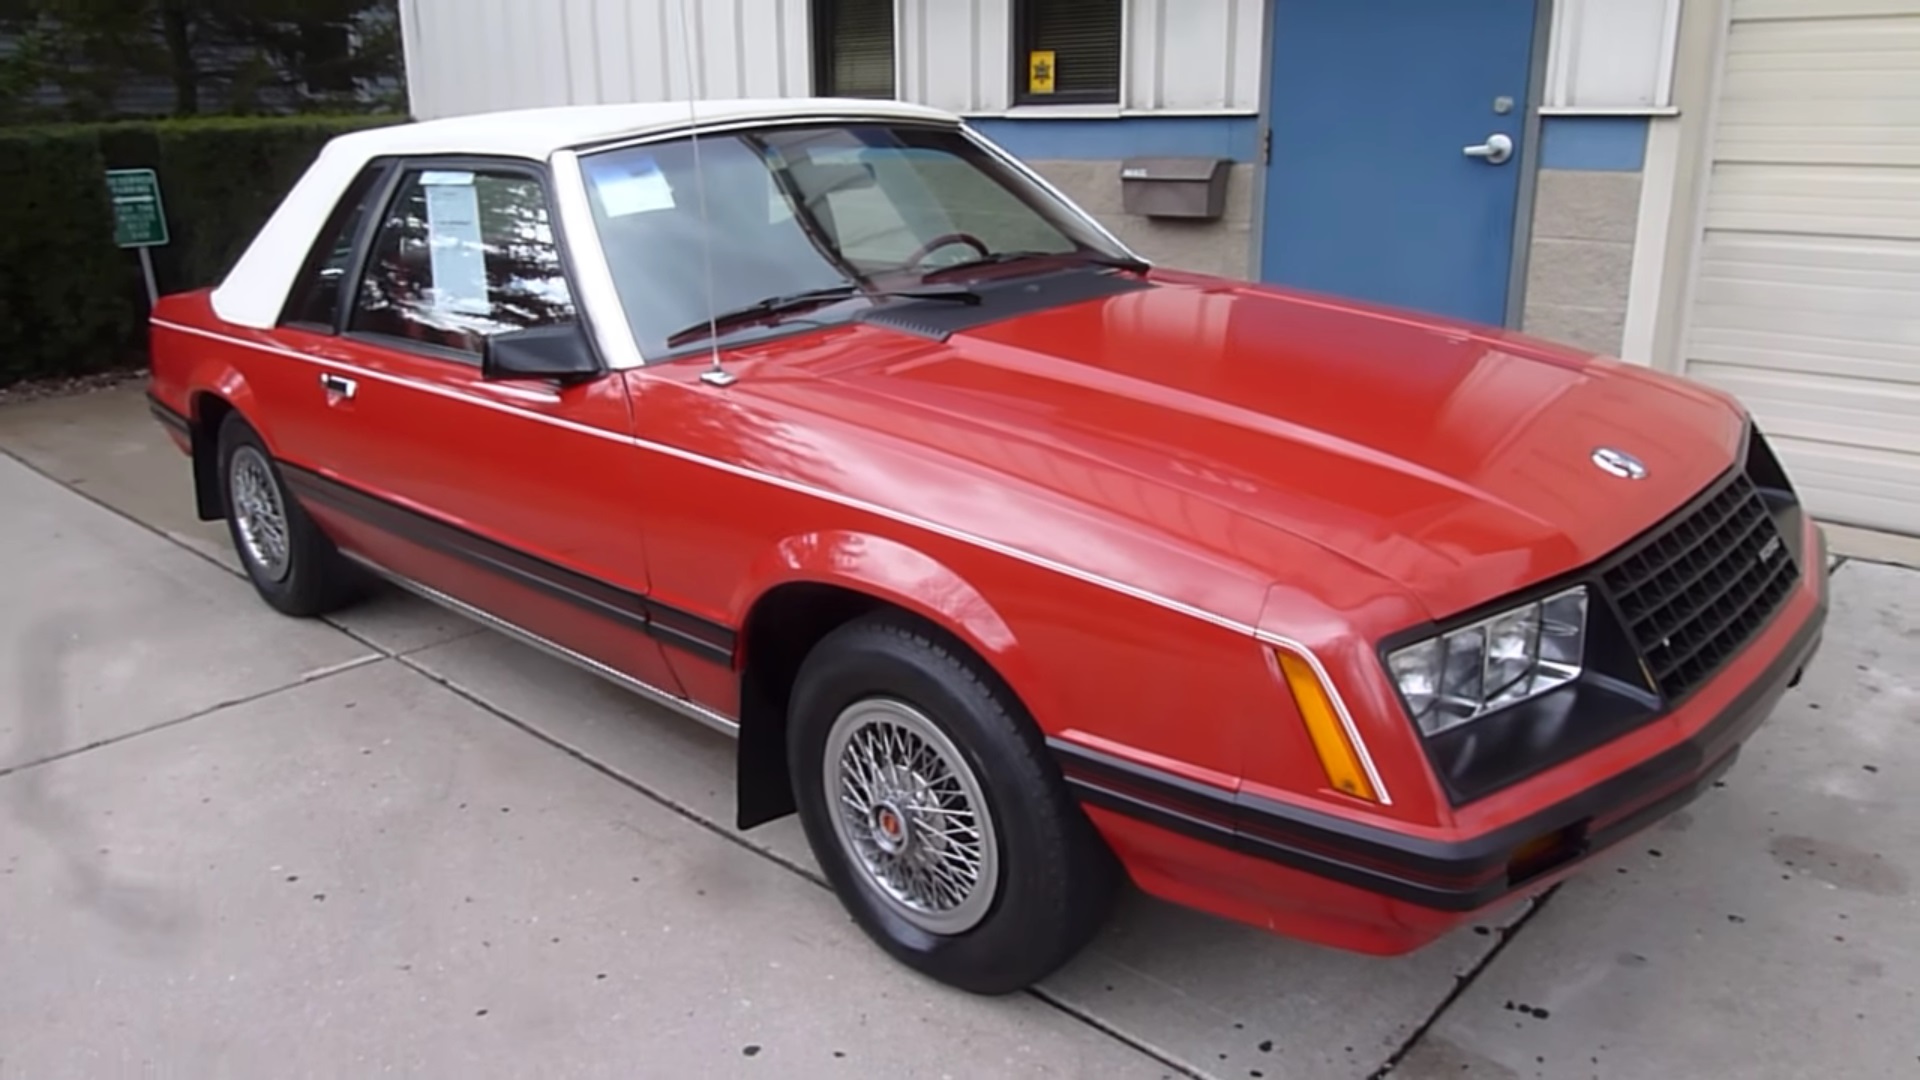 Video: 1979 Ford Mustang Ghia Quick Tour